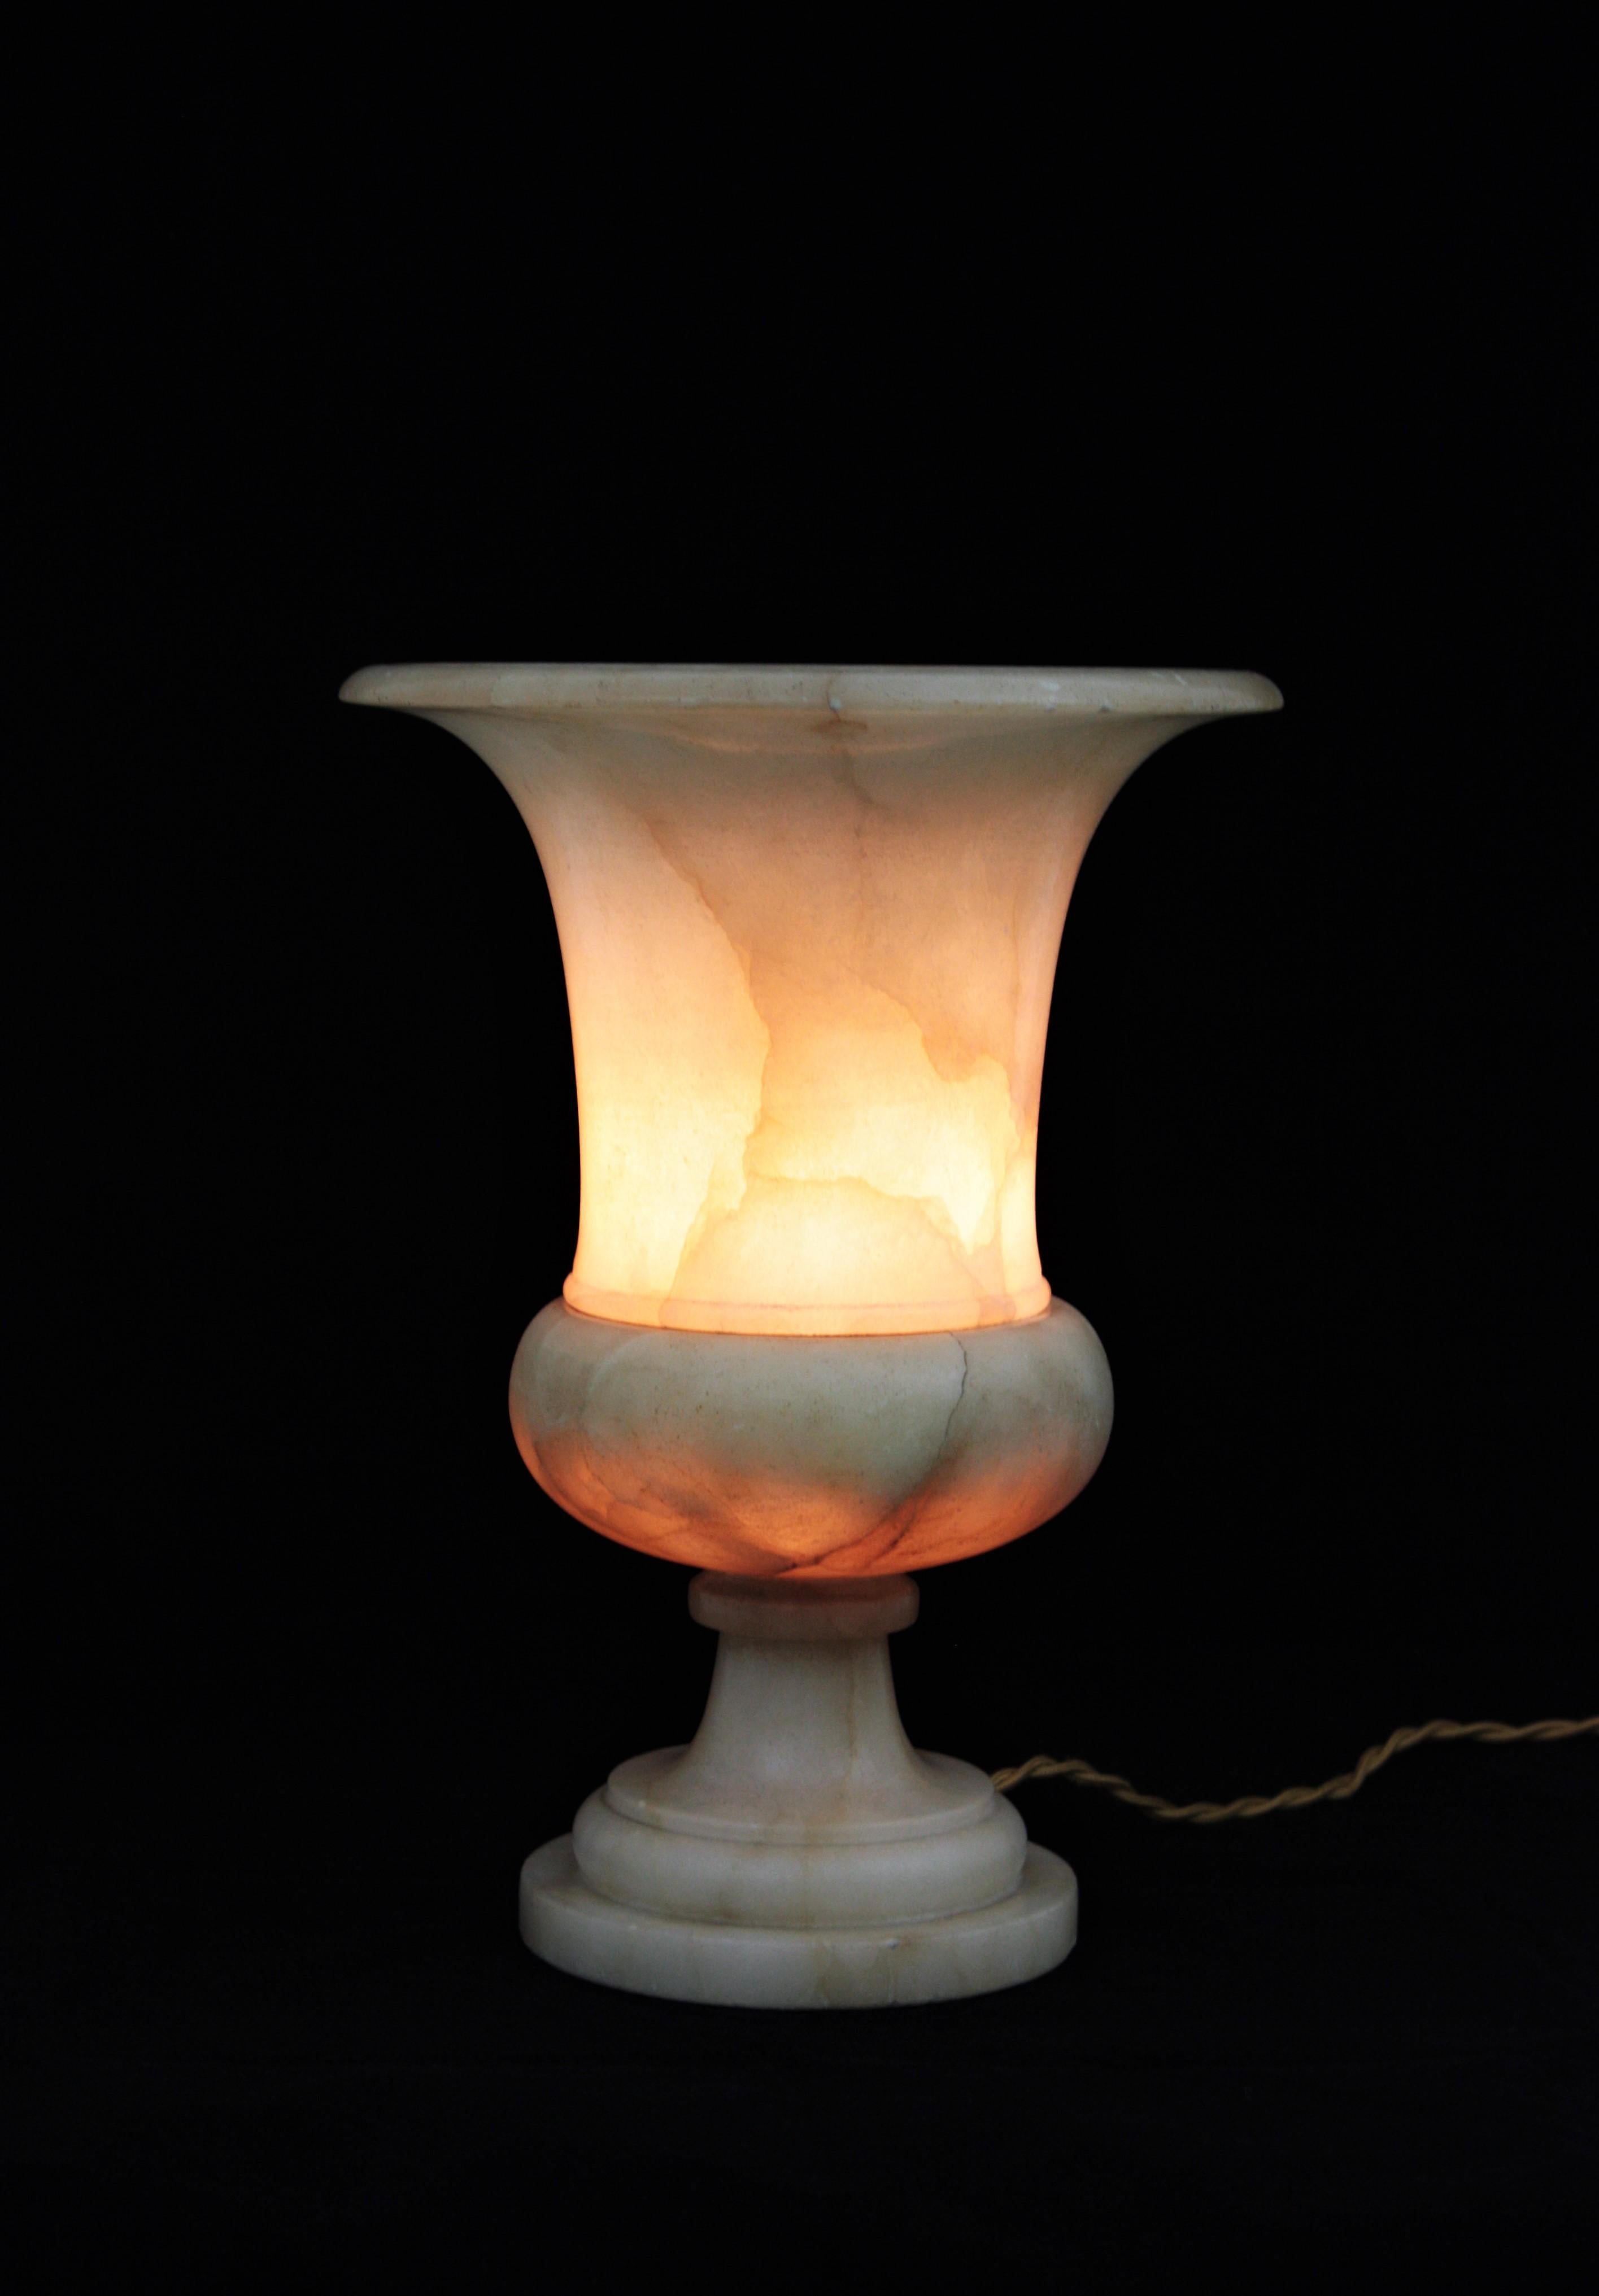 Sculptural alabaster Art Deco period urn table lamp with neoclassical design. Spain, 1930s.
Magnificent color and interesting vintage patina. It provides a charming light. Impressive appearance when it is lit.
This elegant carved alabaster